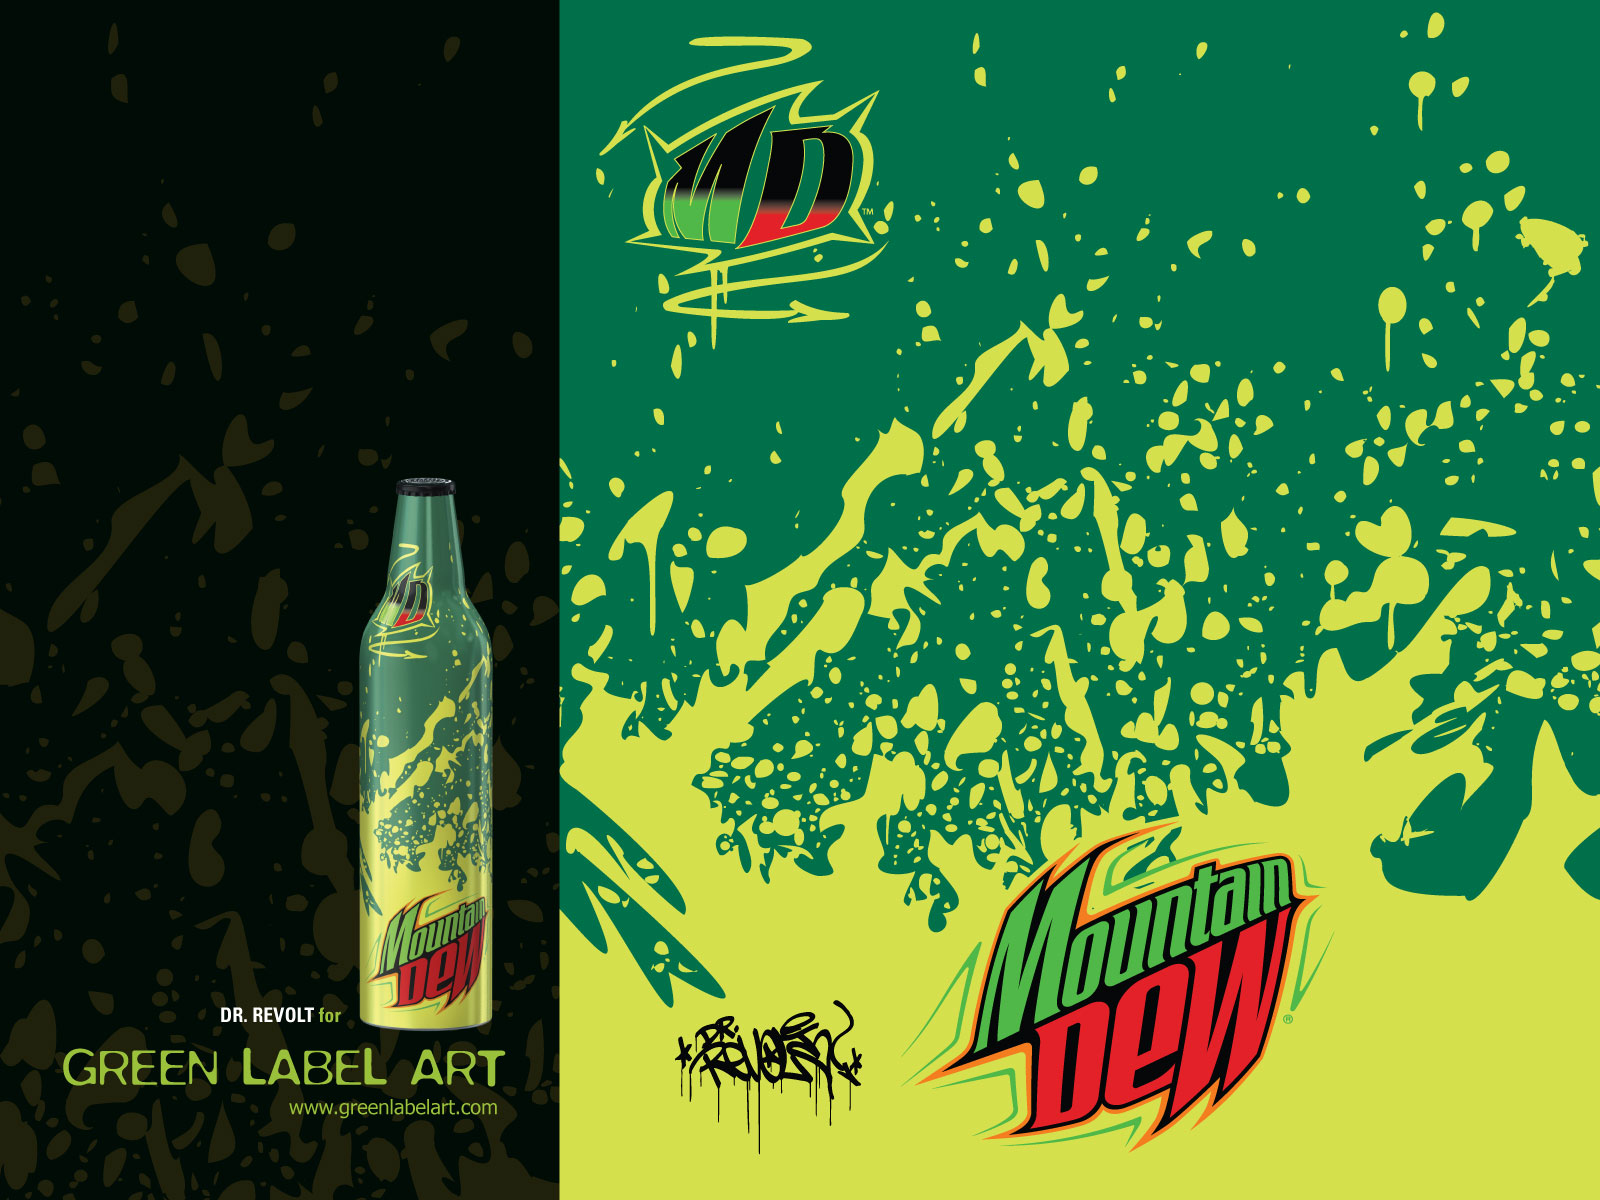 Products Mountain Dew 1600x1200